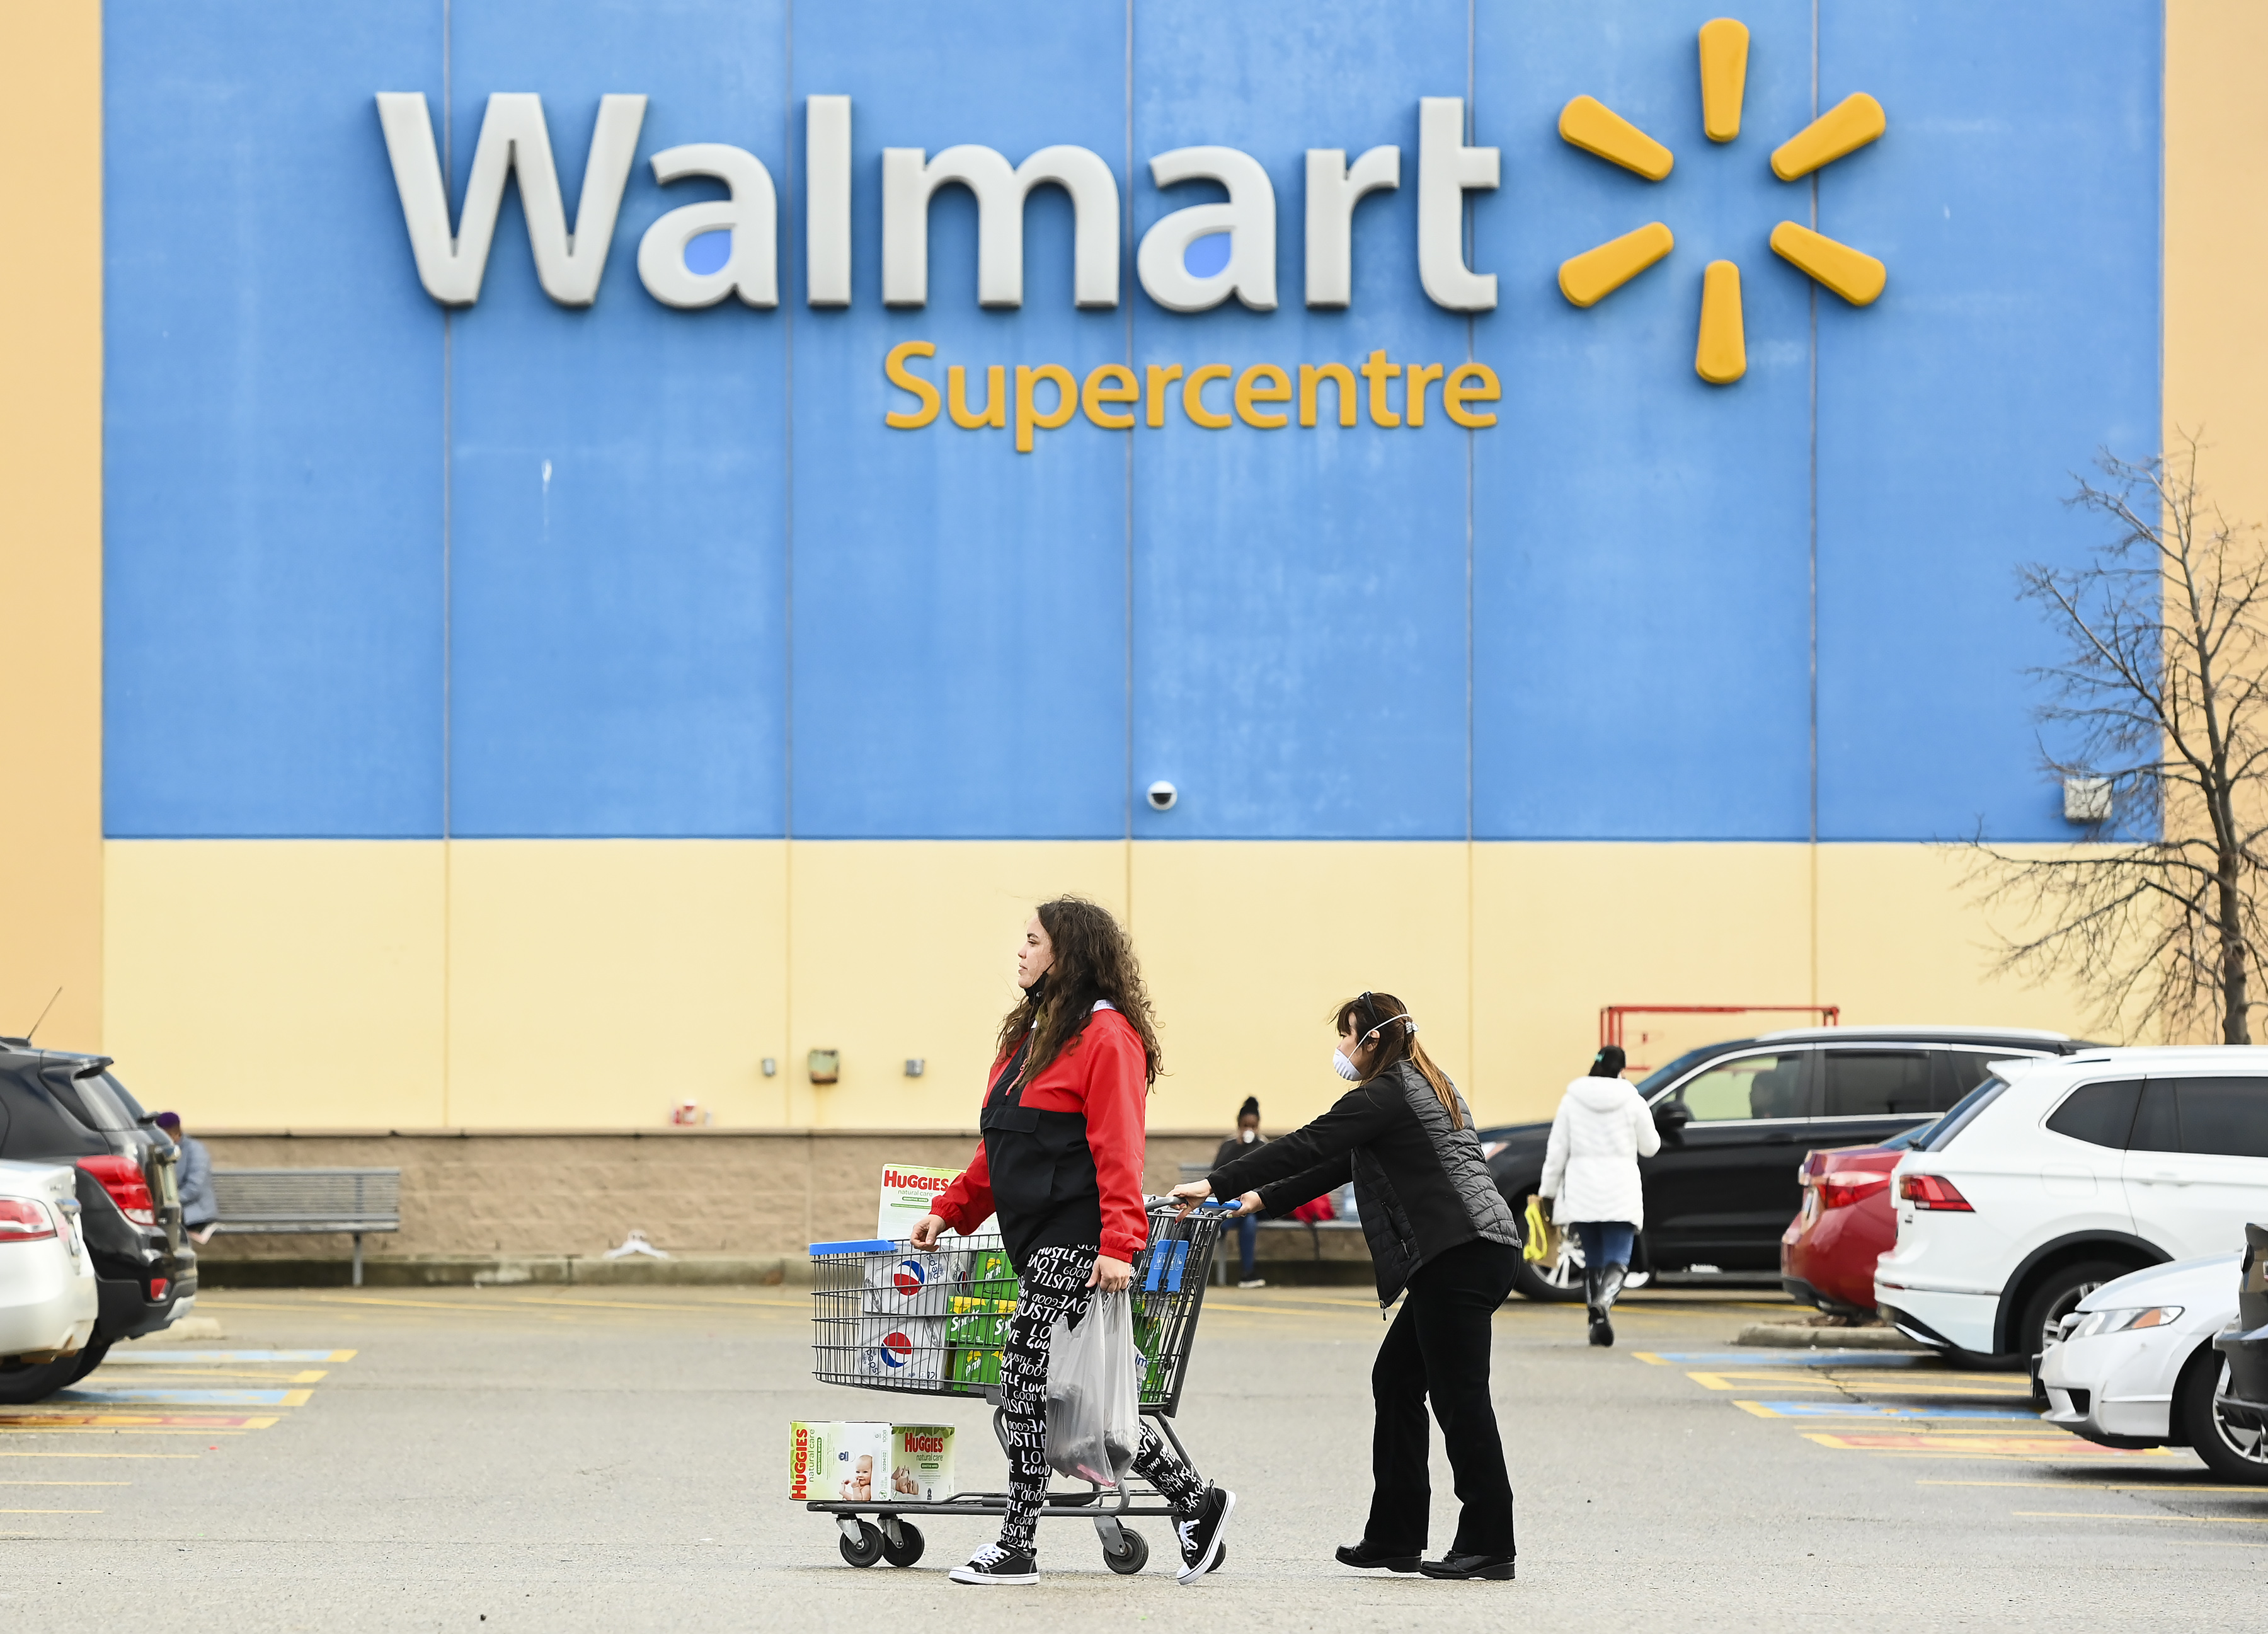 Walmart Canada says it will spend $1B to 'modernize' its stores - National